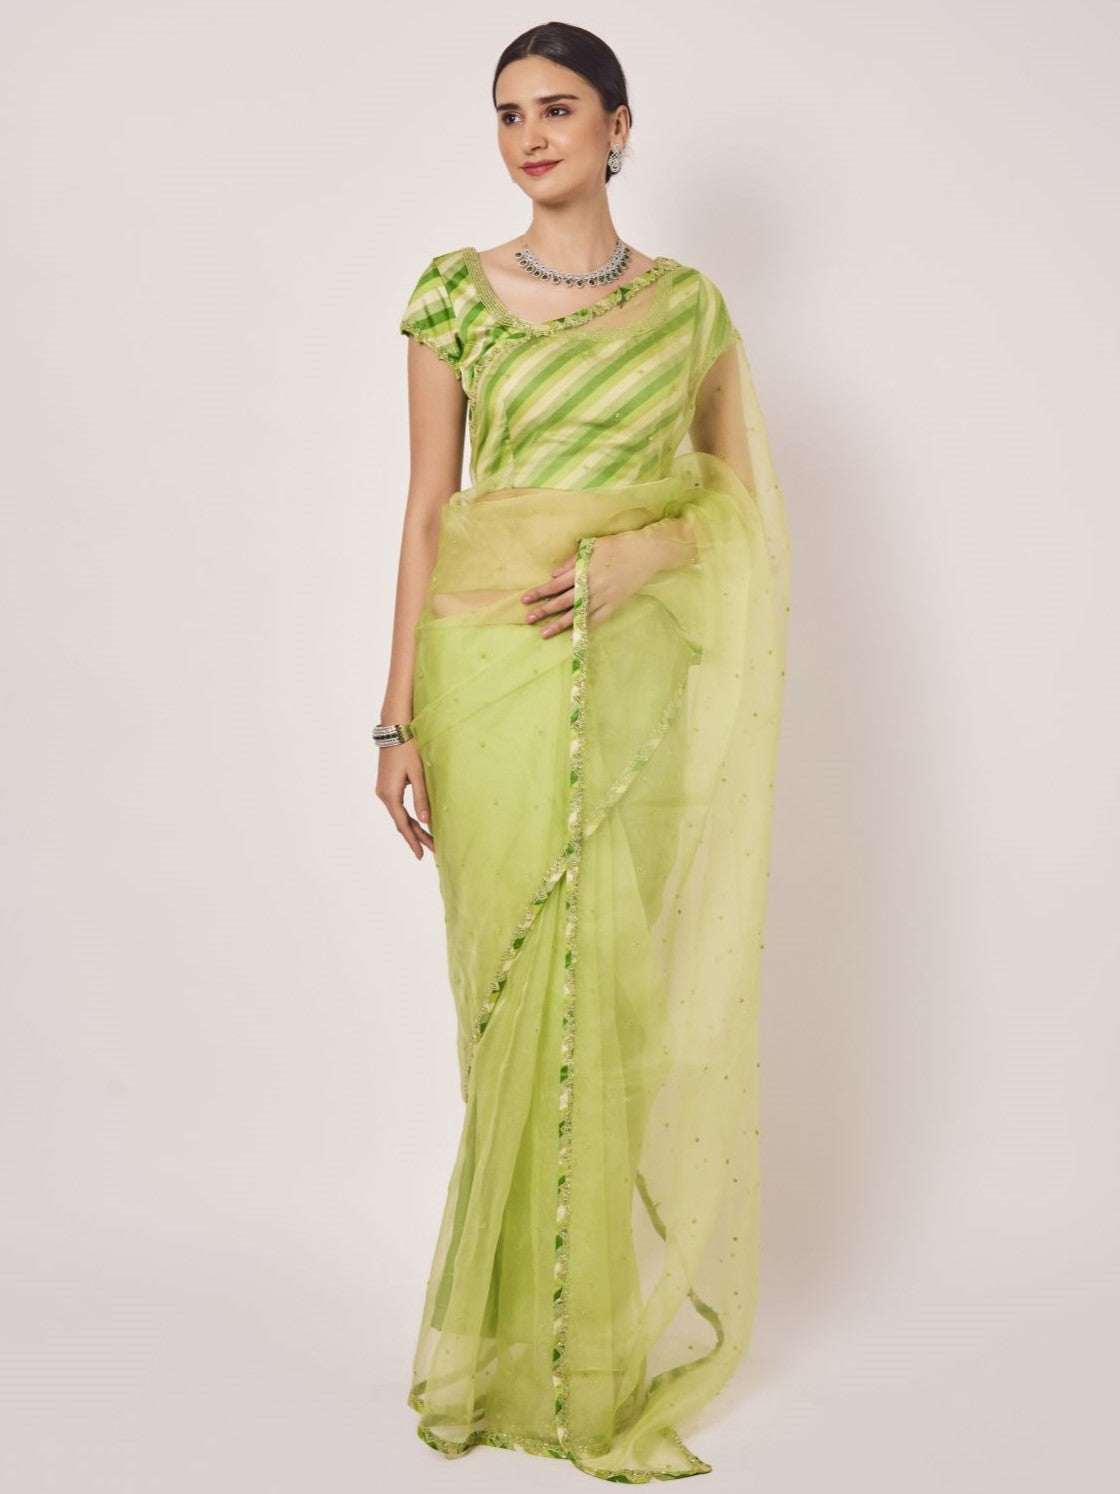 Buy pista green cutdana and pearl work organza sari online in USA. Make a fashion statement on festive occasions and weddings with designer sarees, designer suits, Indian dresses, Anarkali suits, palazzo suits, designer gowns, sharara suits, embroidered sarees from Pure Elegance Indian fashion store in USA.-full view